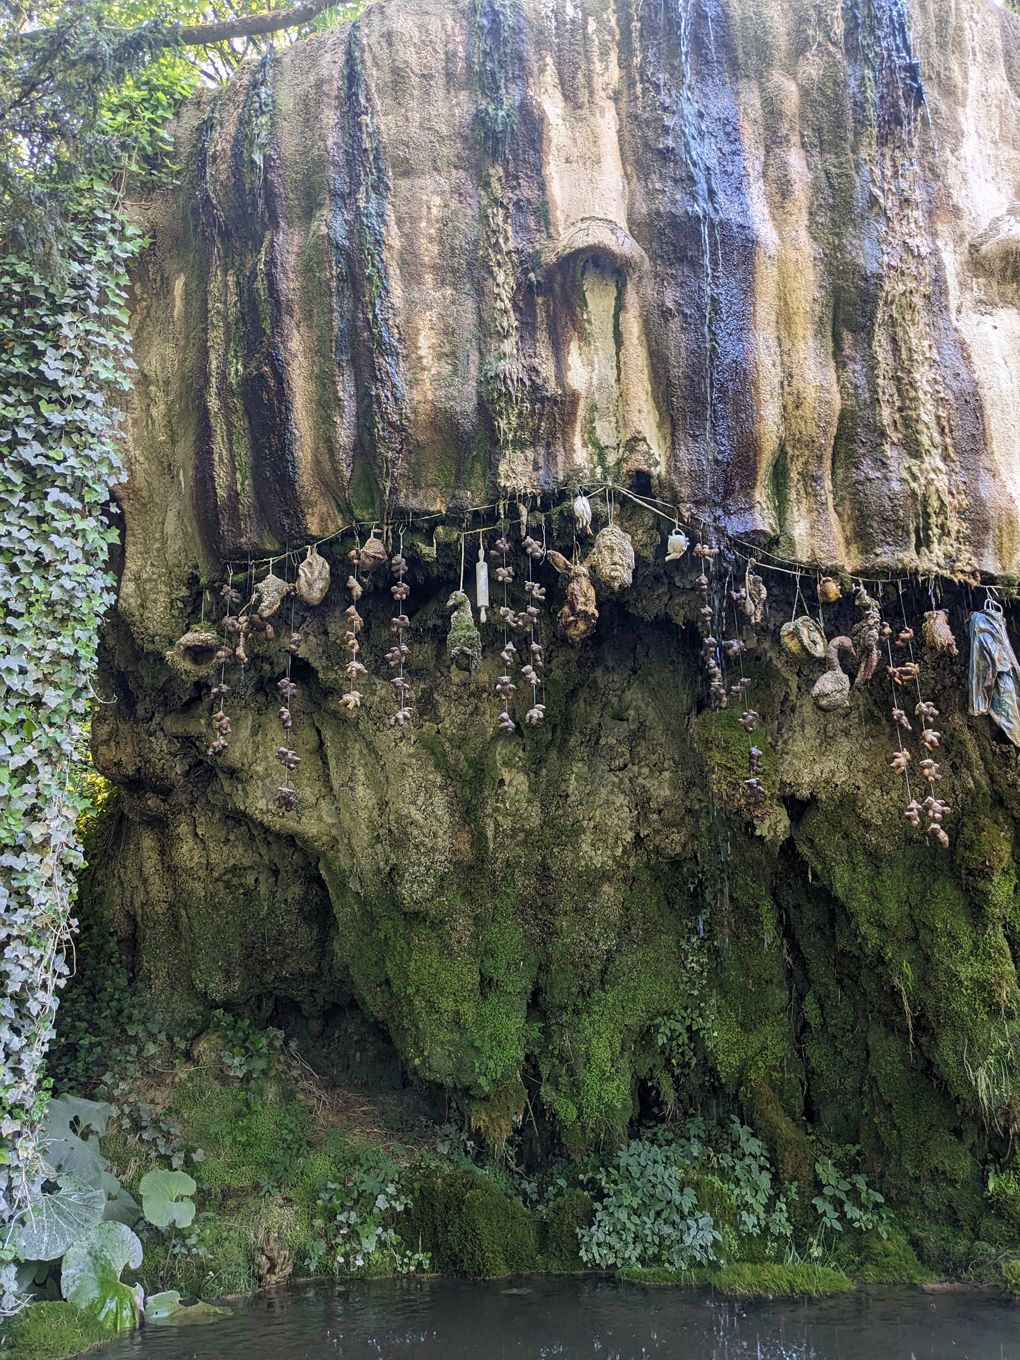 A rocky outcrop over which water drips into a pool below. A multitude of objects are hung in the path of the water as it drips down slowly turning them into stone including teddy bears, shoes, handbags and what looks like a human head